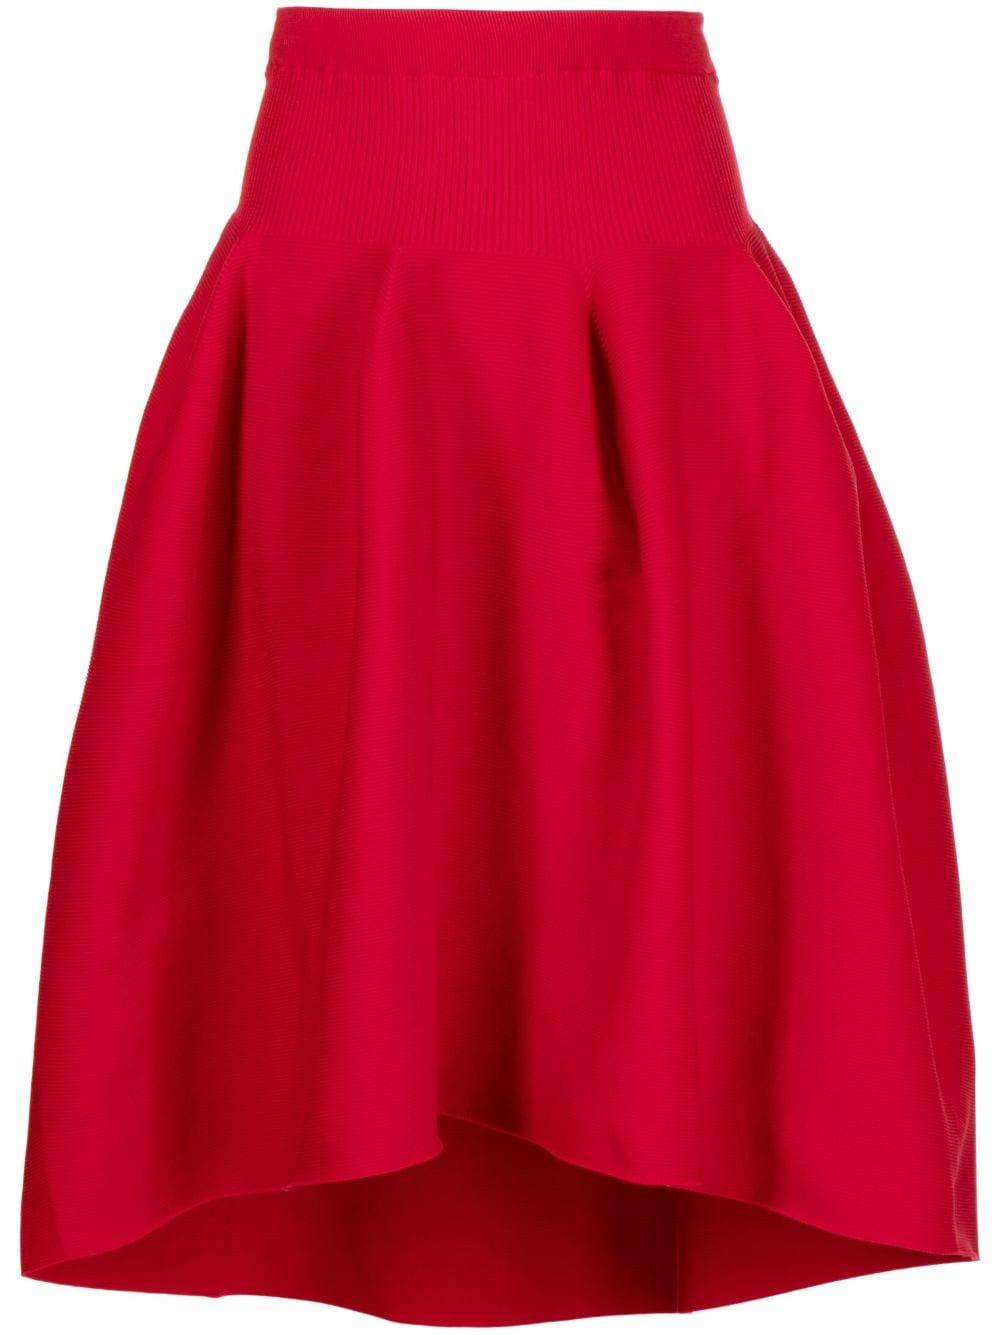 CFCL Pottery High-waisted Full Skirt in Red | Lyst